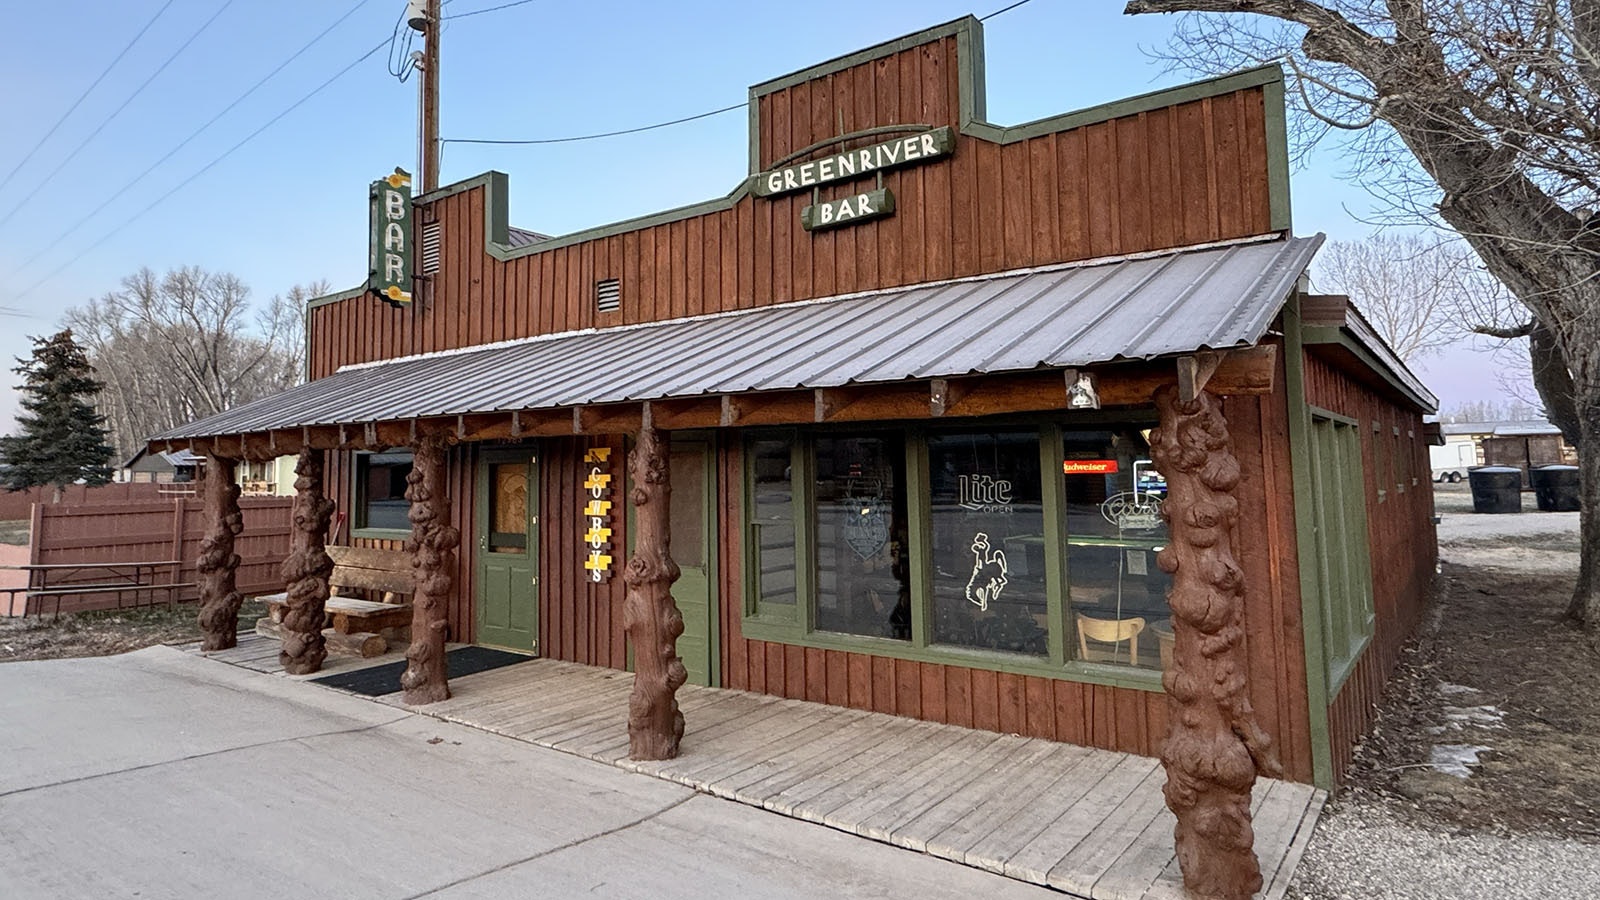 The Green River Bar in Daniel was where local hunter Cody Roberts brought a nearly dead wolf to the rear of the bar to show off to patrons in late February.